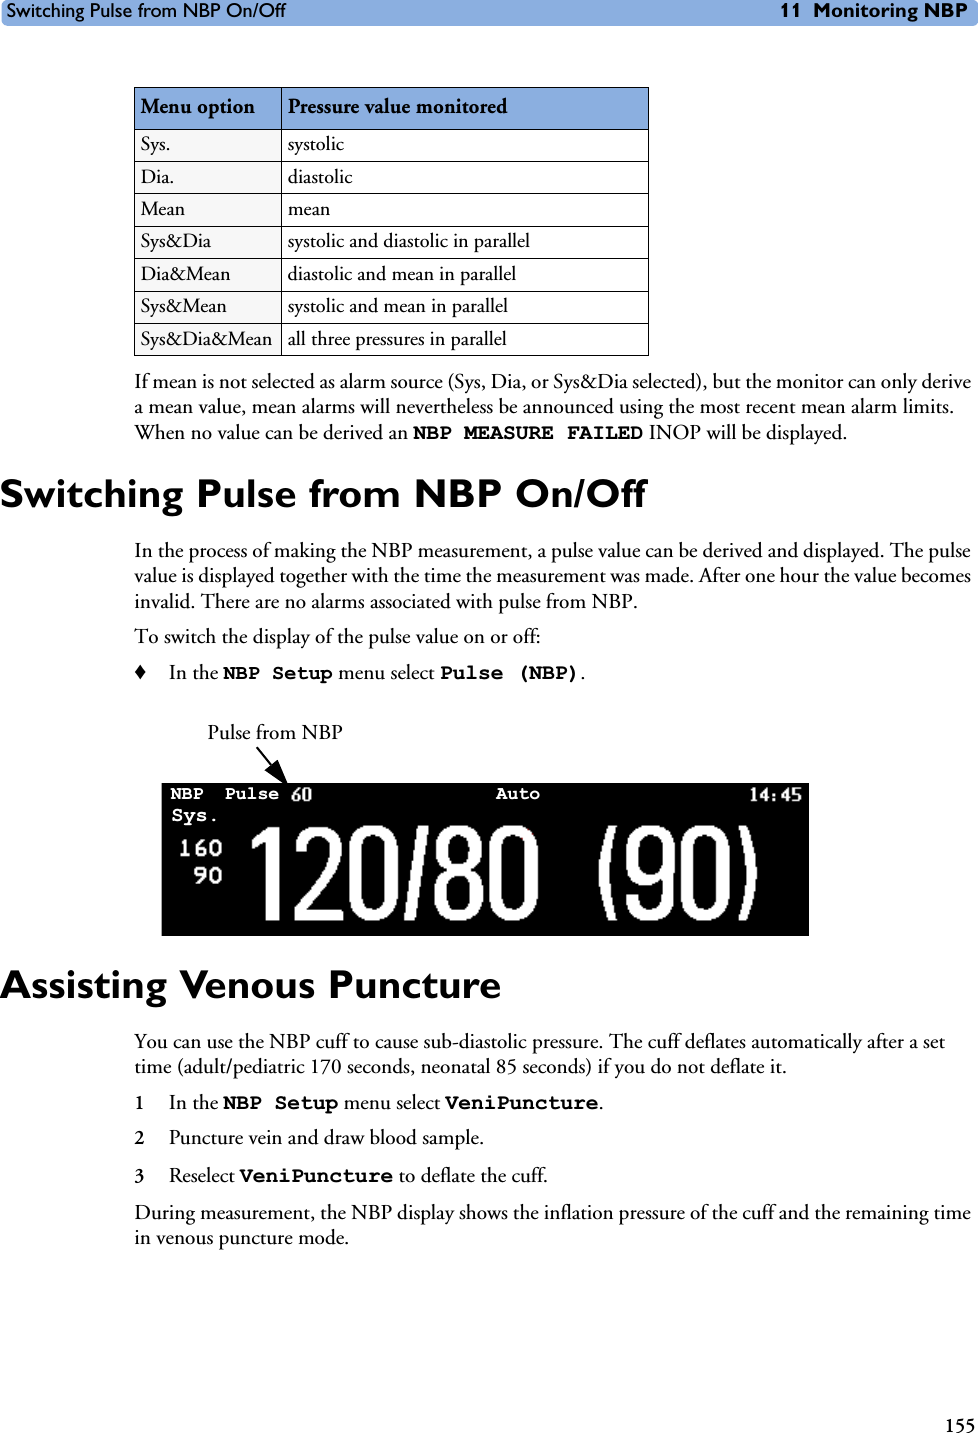 Switching Pulse from NBP On/Off 11 Monitoring NBP155If mean is not selected as alarm source (Sys, Dia, or Sys&amp;Dia selected), but the monitor can only derive a mean value, mean alarms will nevertheless be announced using the most recent mean alarm limits. When no value can be derived an NBP MEASURE FAILED INOP will be displayed.Switching Pulse from NBP On/OffIn the process of making the NBP measurement, a pulse value can be derived and displayed. The pulse value is displayed together with the time the measurement was made. After one hour the value becomes invalid. There are no alarms associated with pulse from NBP. To switch the display of the pulse value on or off:♦In the NBP Setup menu select Pulse (NBP).Assisting Venous PunctureYou can use the NBP cuff to cause sub-diastolic pressure. The cuff deflates automatically after a set time (adult/pediatric 170 seconds, neonatal 85 seconds) if you do not deflate it.1In the NBP Setup menu select VeniPuncture.2Puncture vein and draw blood sample.3Reselect VeniPuncture to deflate the cuff. During measurement, the NBP display shows the inflation pressure of the cuff and the remaining time in venous puncture mode.Menu option Pressure value monitoredSys. systolic Dia. diastolic Mean mean Sys&amp;Dia systolic and diastolic in parallelDia&amp;Mean diastolic and mean in parallelSys&amp;Mean systolic and mean in parallelSys&amp;Dia&amp;Mean all three pressures in parallelPulse from NBPNBP AutoSys.Pulse